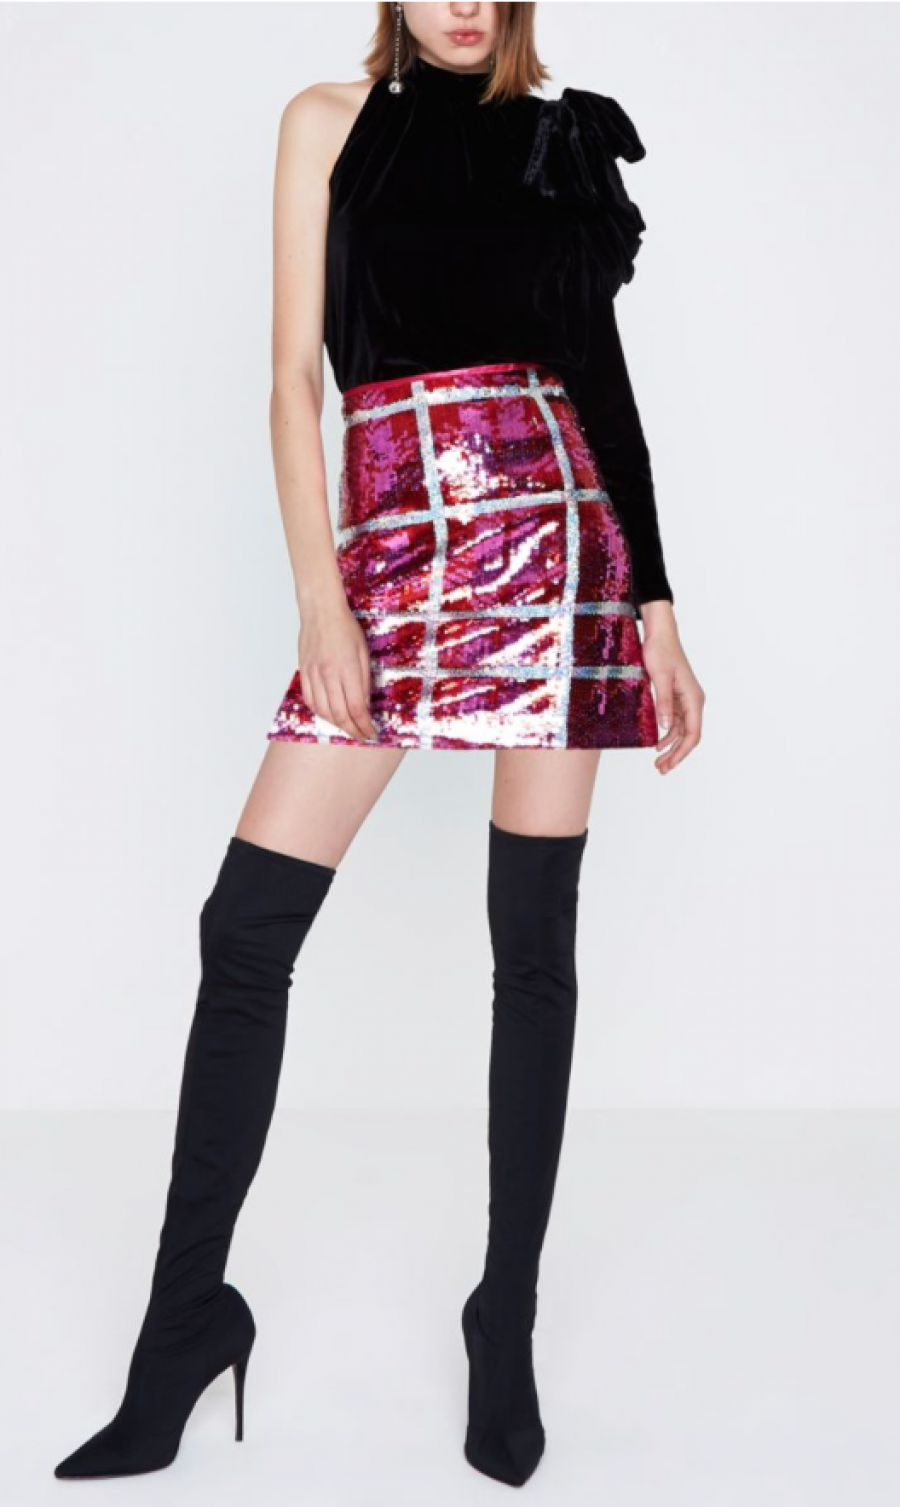 See Need Want Fashion Trend Sequinned Skirt River Island